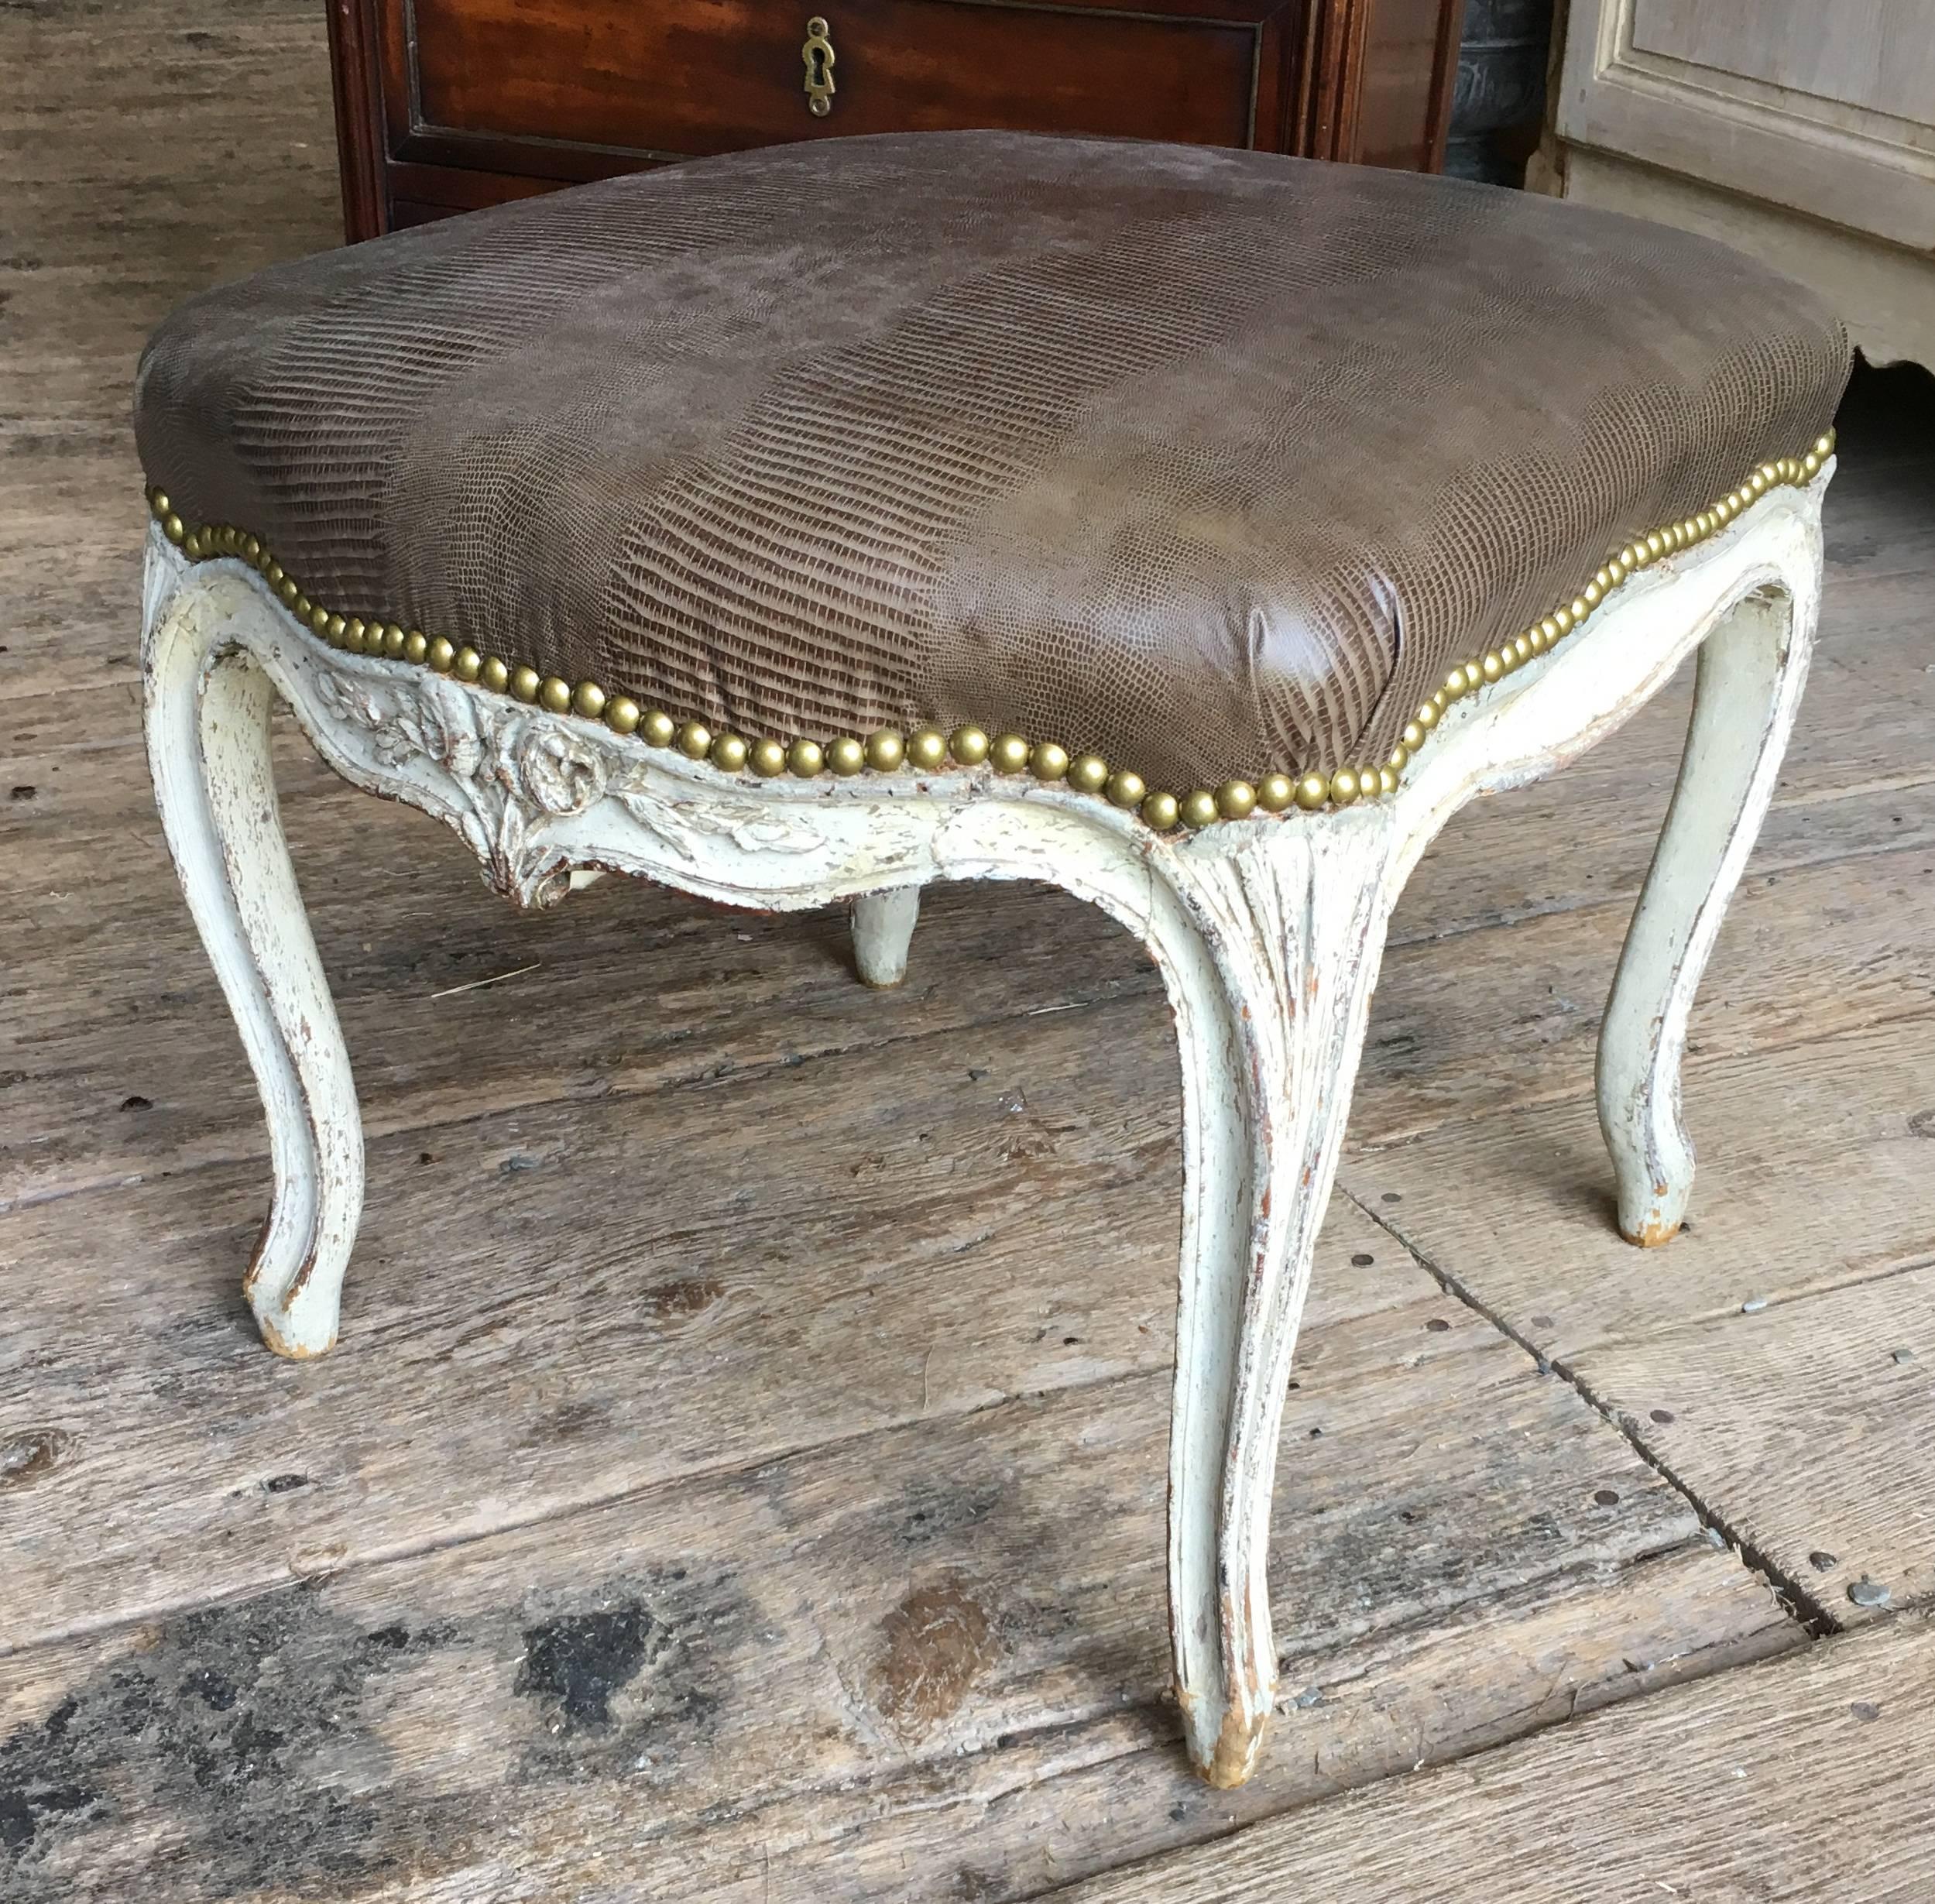 A French Louis XV period tabouret bench in beech, nicely carved with cabriole legs and floral carvings on apron, in old grey/cream painted finish, upholstered in embossed brown leather.